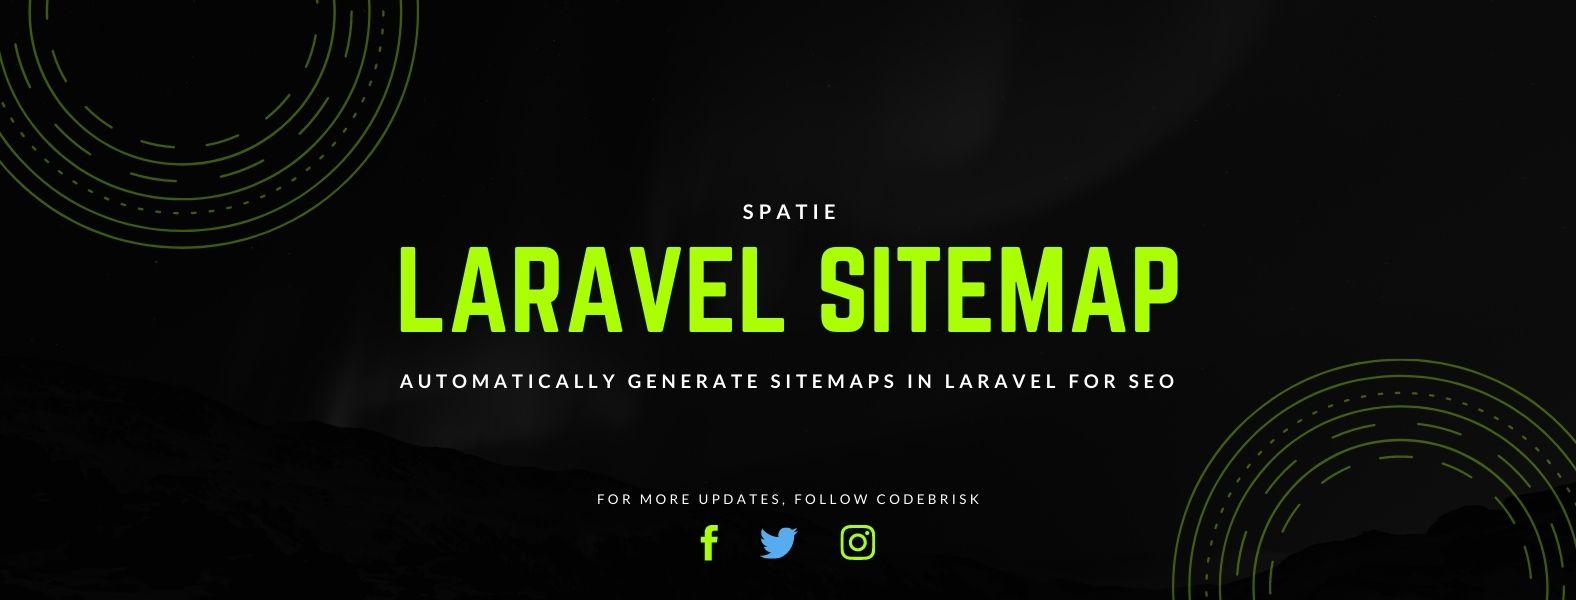 Automatically Generate sitemaps in Laravel for SEO cover image